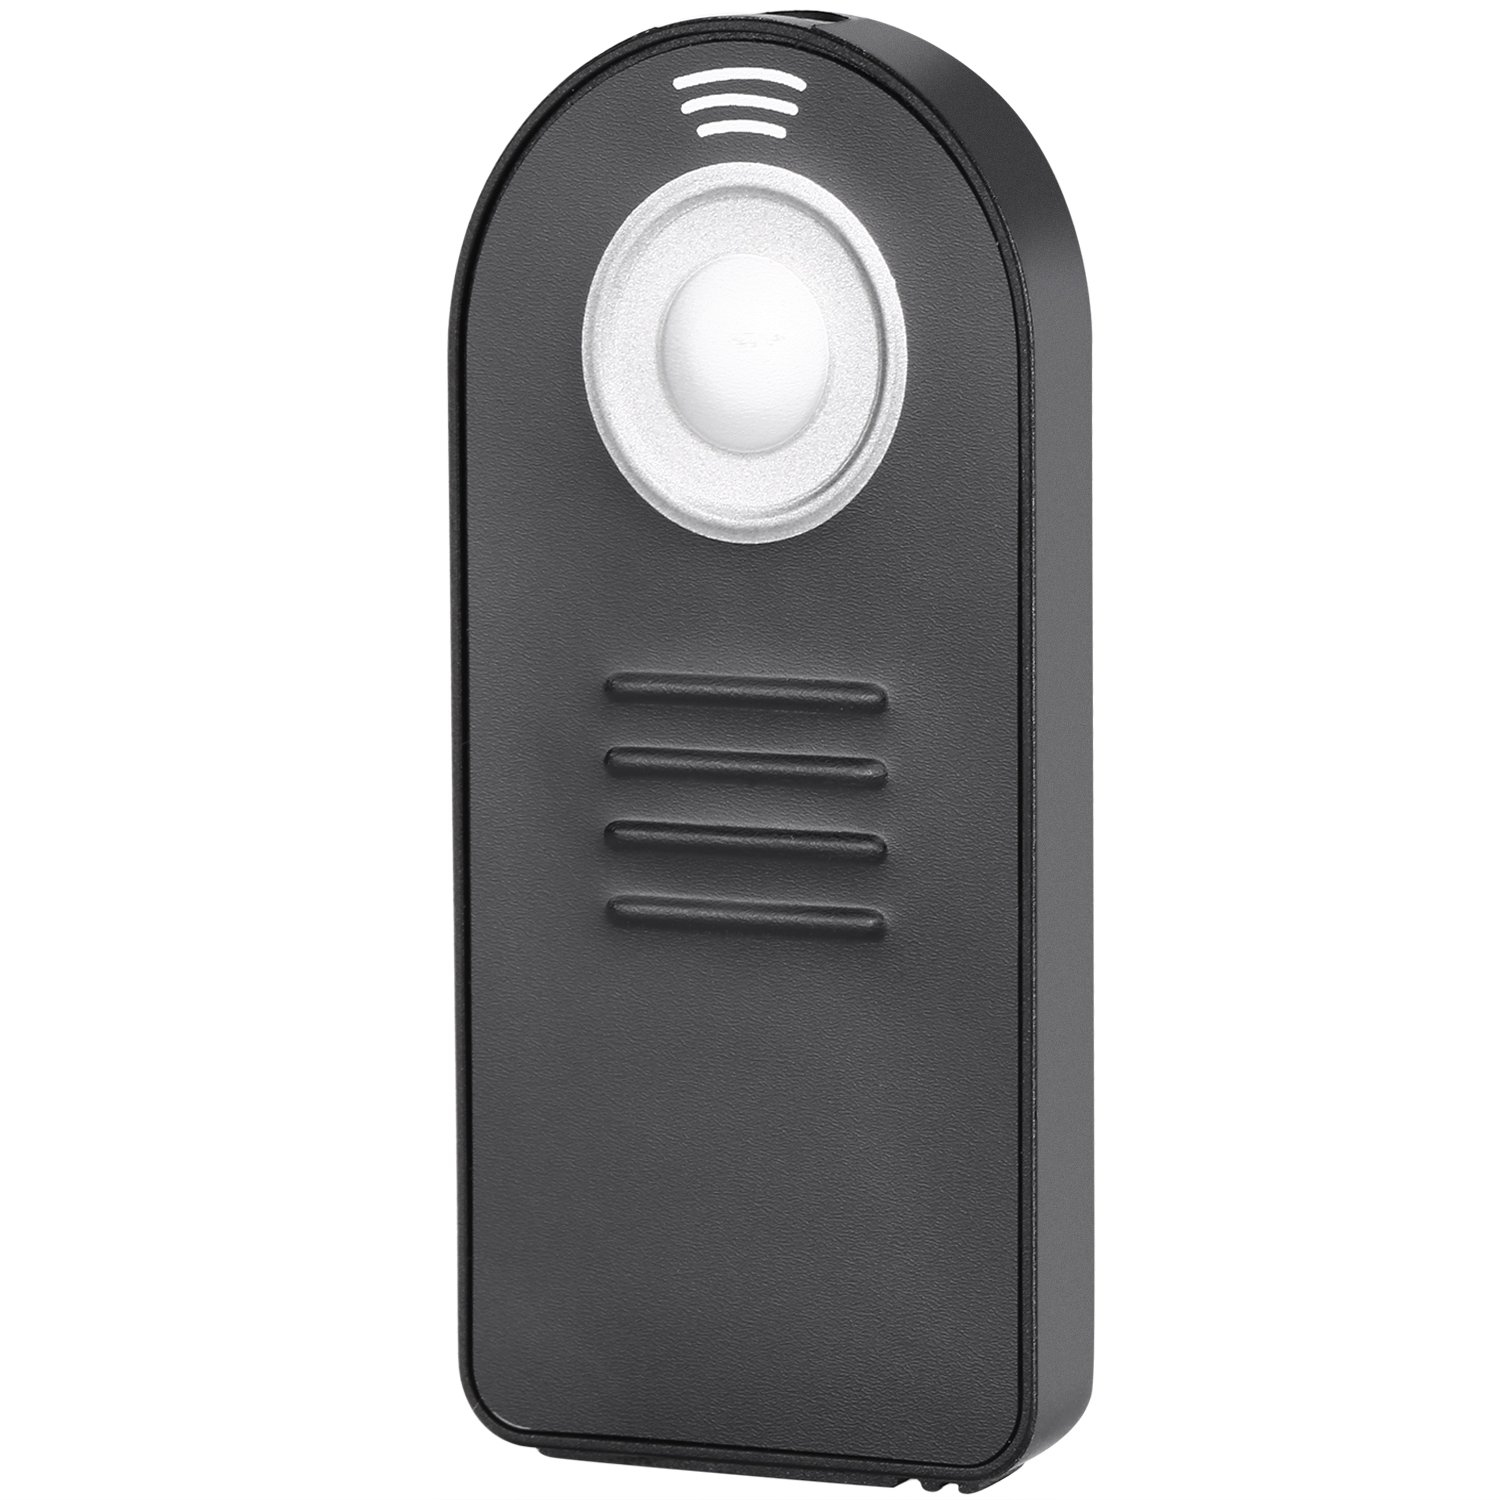 Wireless Camera Infrared Remote Shutter Release Control Compatible with Canon Nikon Sony Pentax Cameras